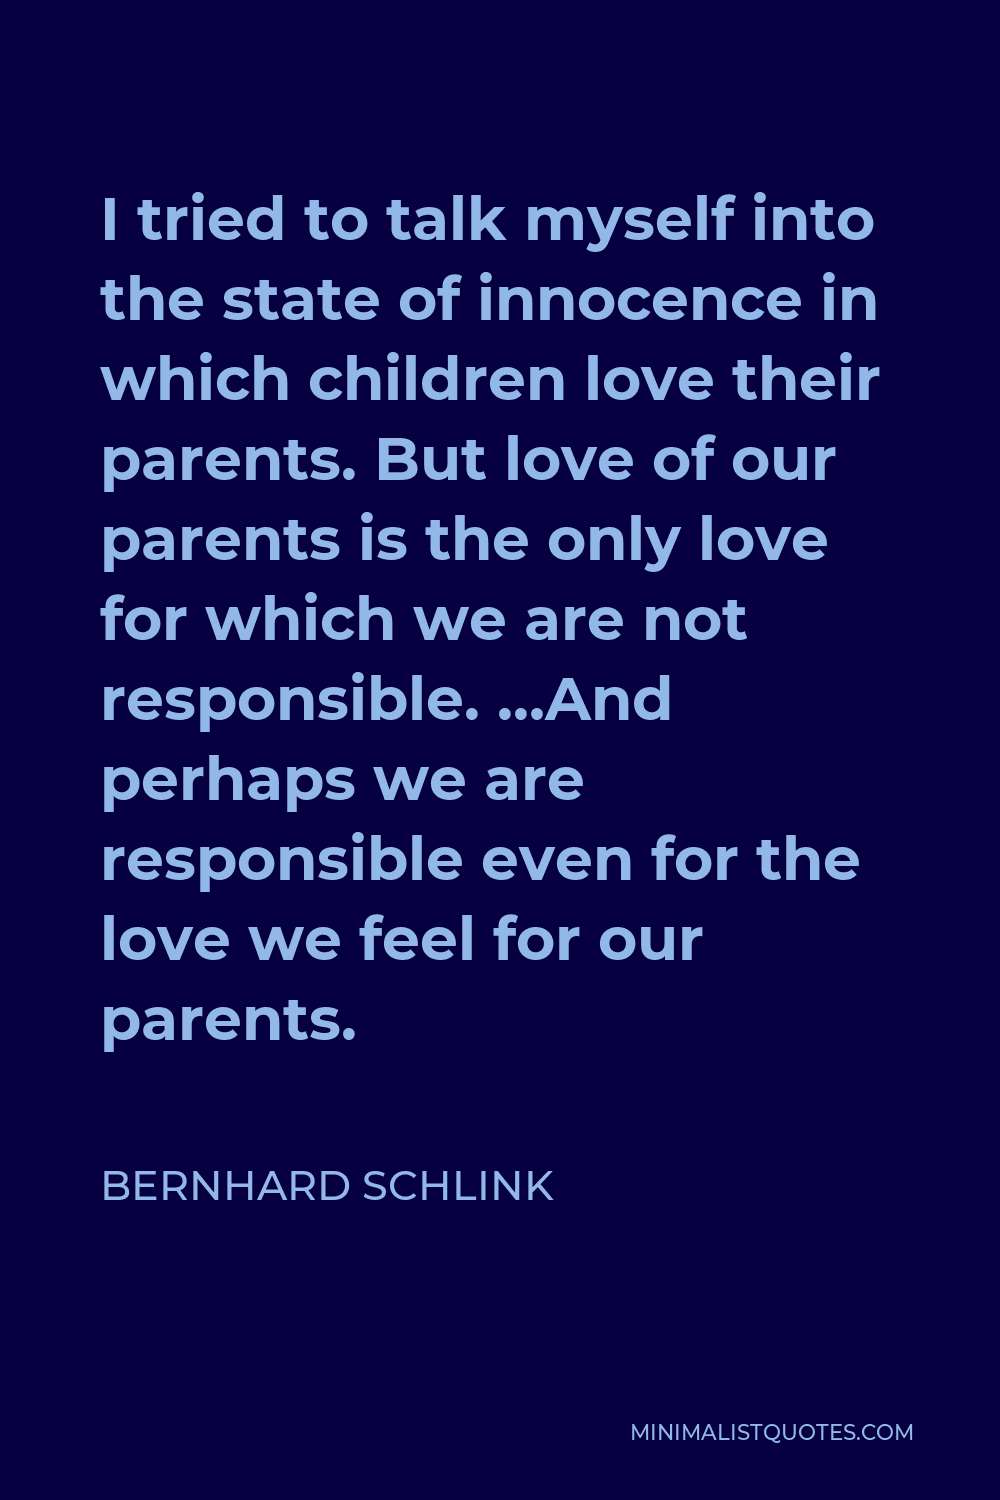 Bernhard Schlink Quote - I tried to talk myself into the state of innocence in which children love their parents. But love of our parents is the only love for which we are not responsible. …And perhaps we are responsible even for the love we feel for our parents.